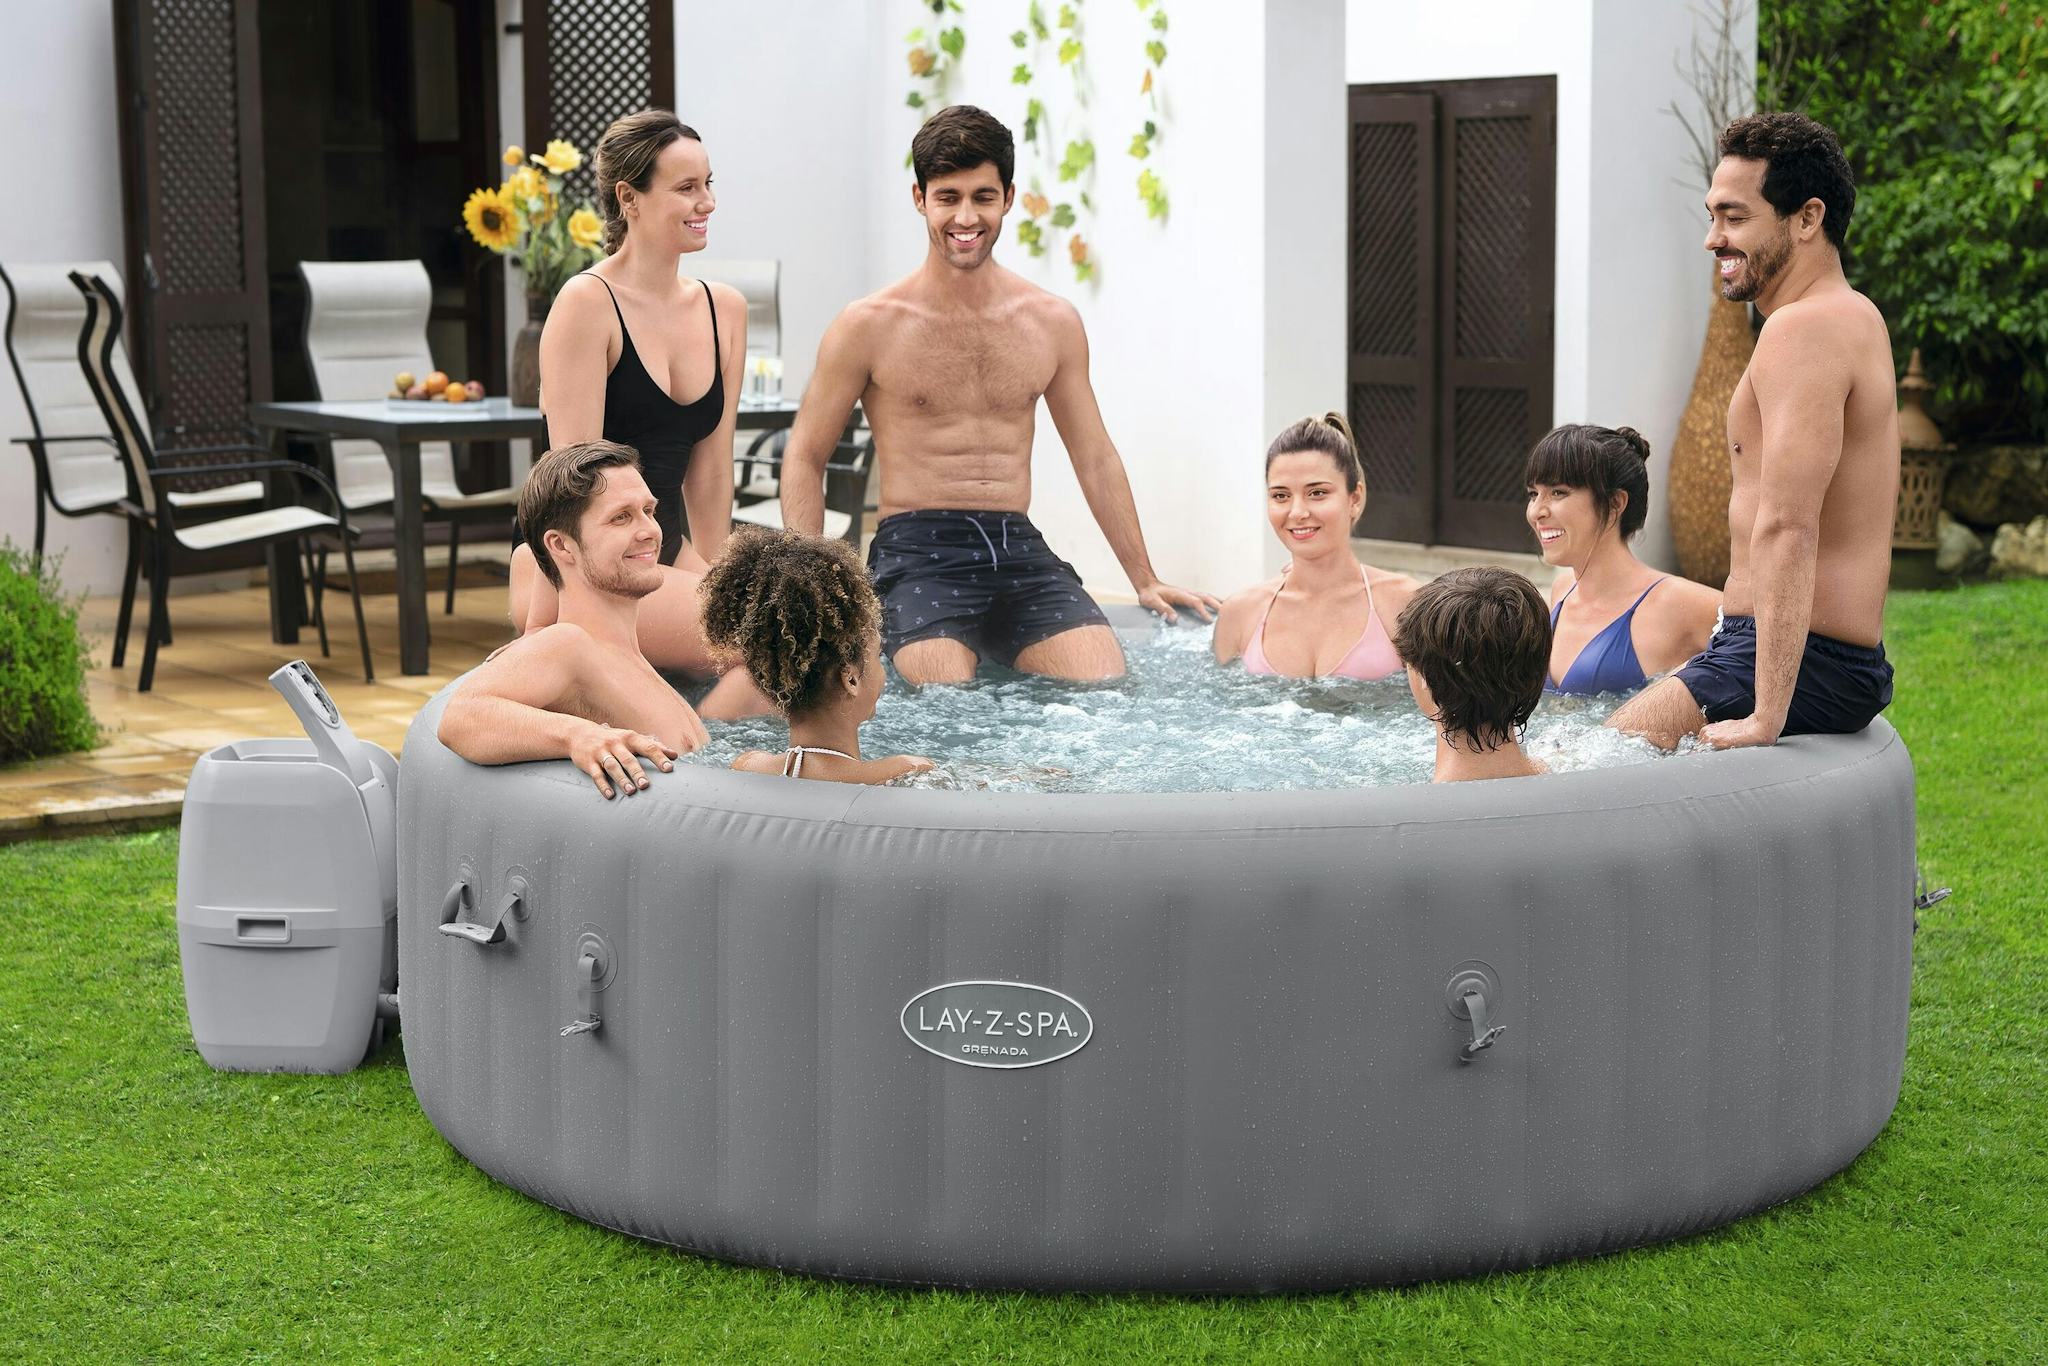 Spas Gonflables Spa gonflable rond Lay-Z-Spa Grenada Airjet™ 6 - 8 personnes Bestway 13